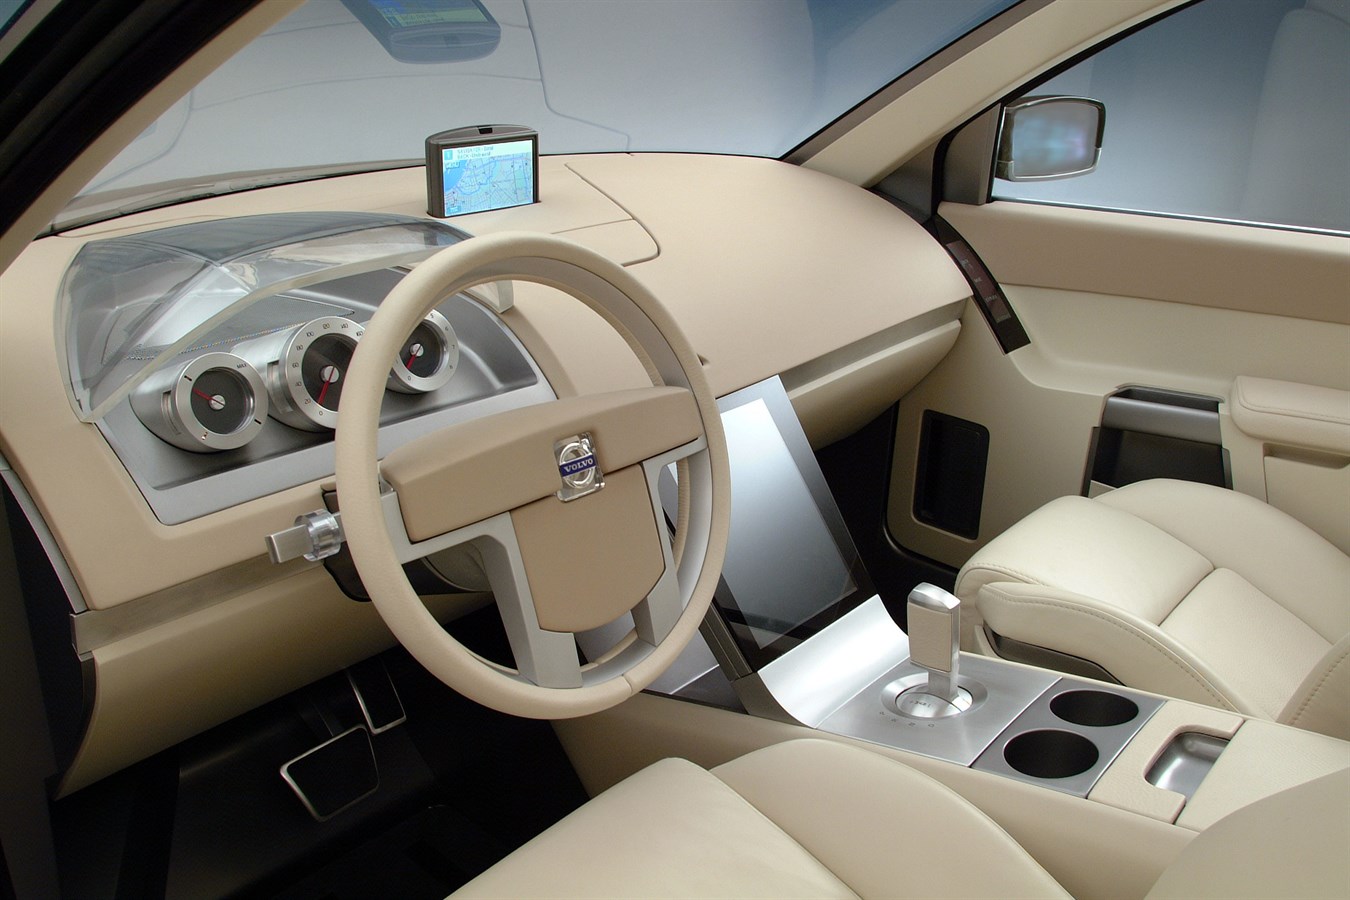 Volvo ACC Adventure Concept Car), 2001, Interior, The ACC was first shown at the Geneva Motor Show about two years before Volvo SUV, the XC90, came onto the market, No secret was made of the fact, that this was a taste of things to come